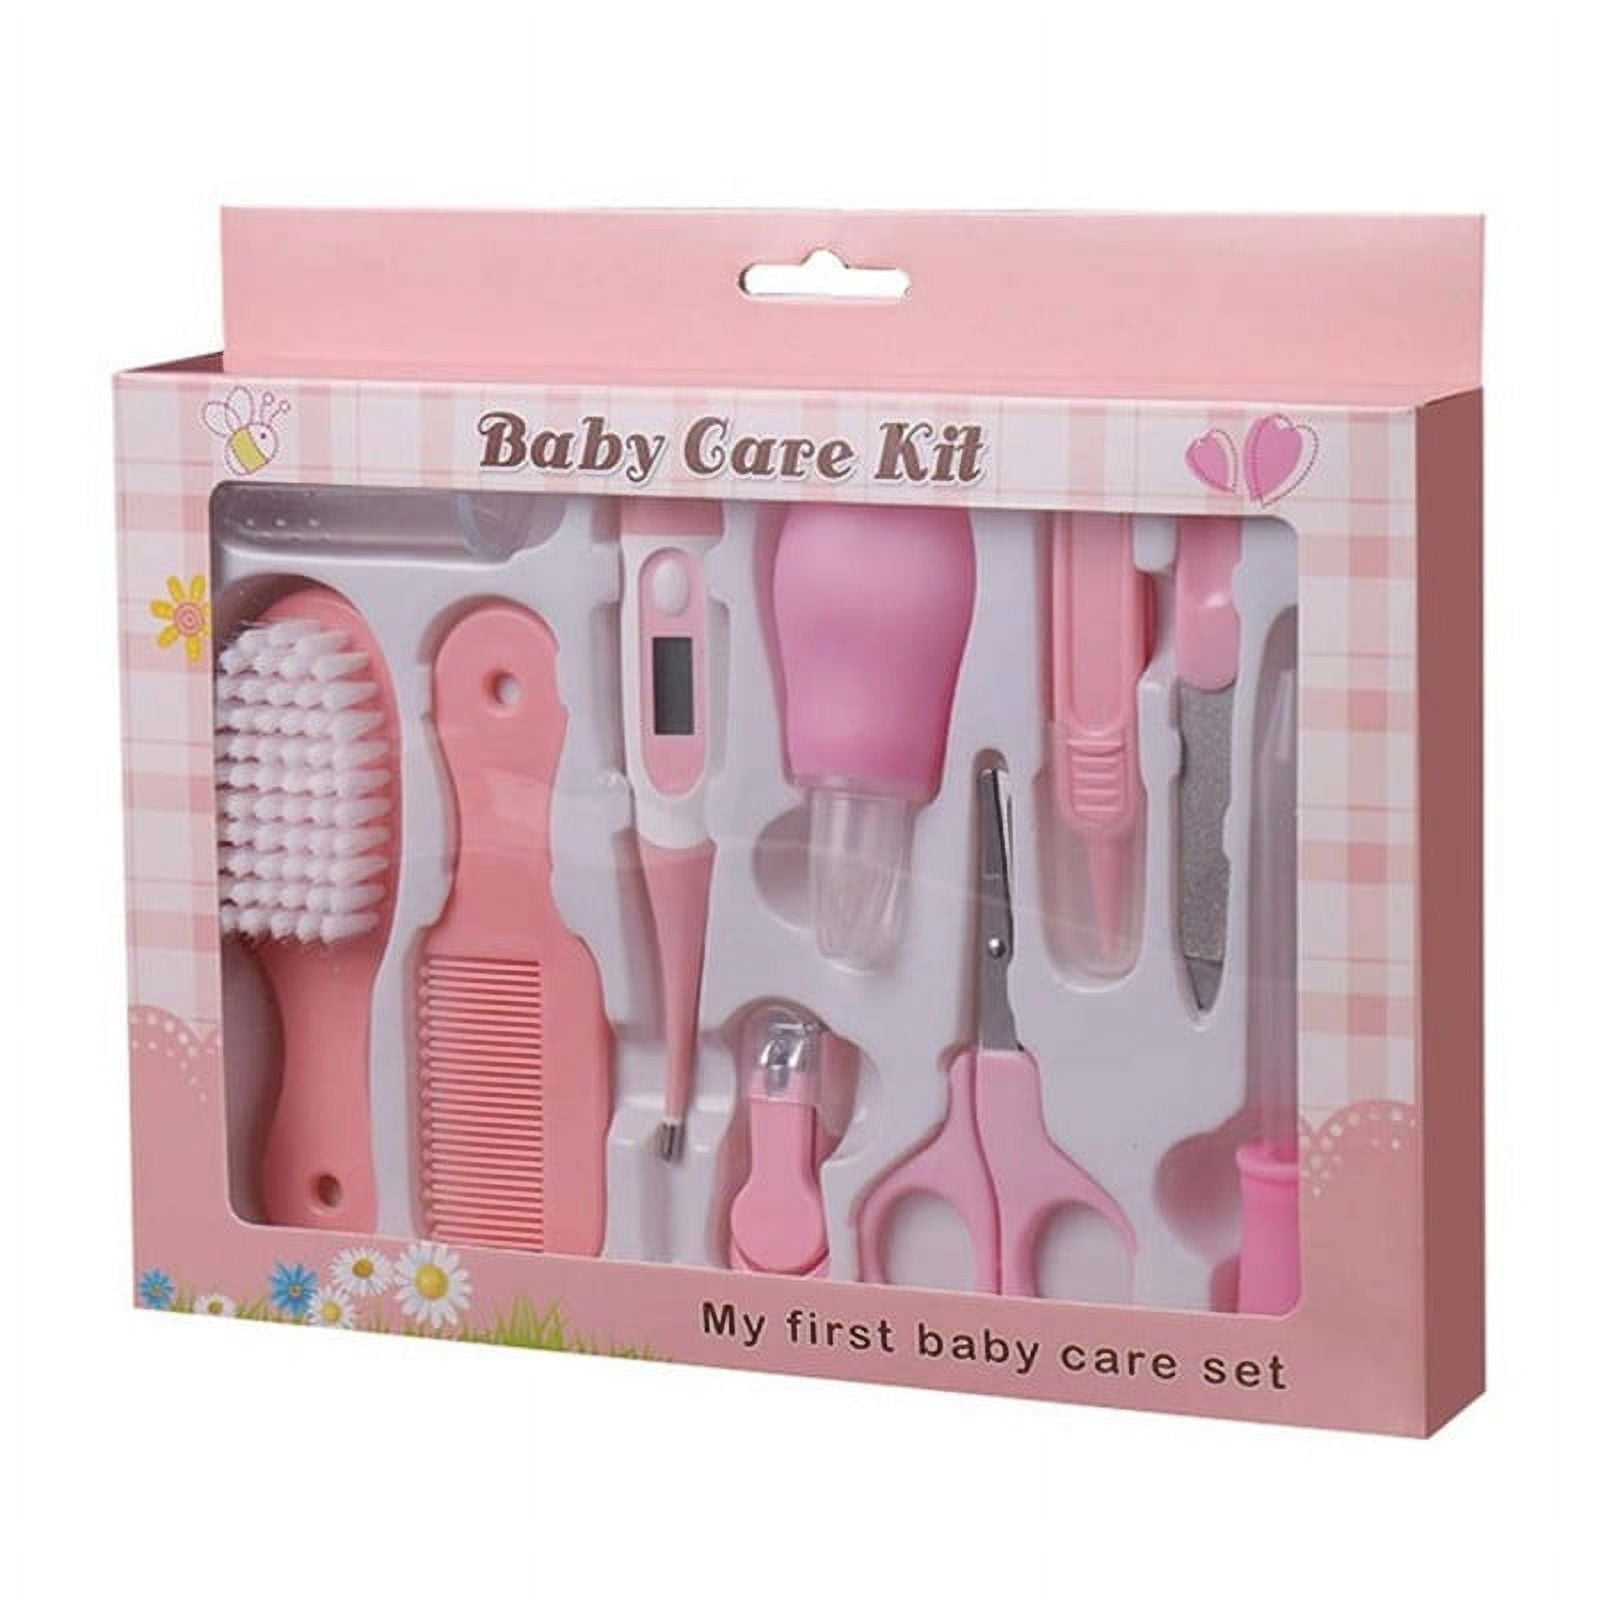 2N2 Baby Nail Cutter Clippers Kit File for Kids Safe Electric Baby Nail-53  - Price in India, Buy 2N2 Baby Nail Cutter Clippers Kit File for Kids Safe  Electric Baby Nail-53 Online